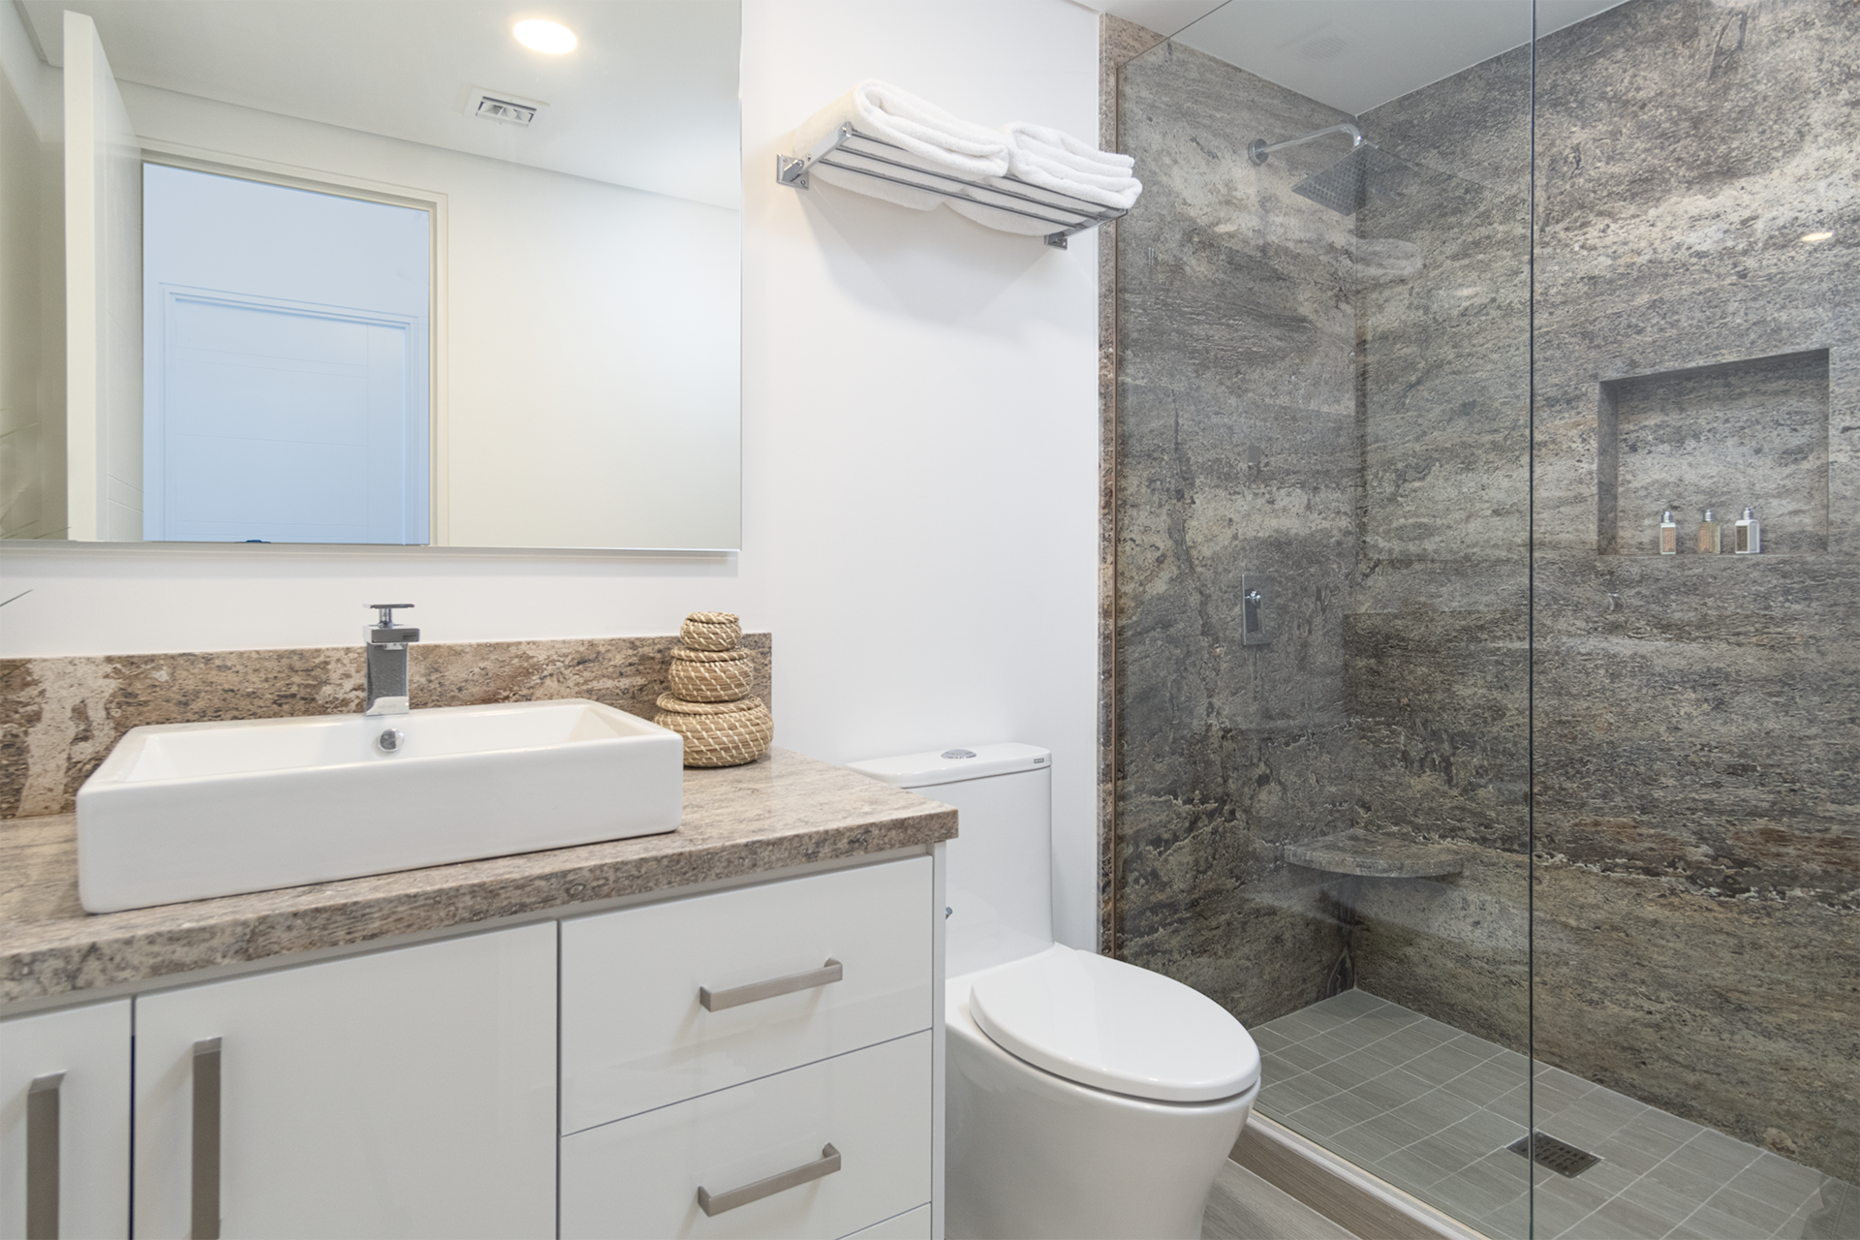 The guest bathroom with glass shower stall